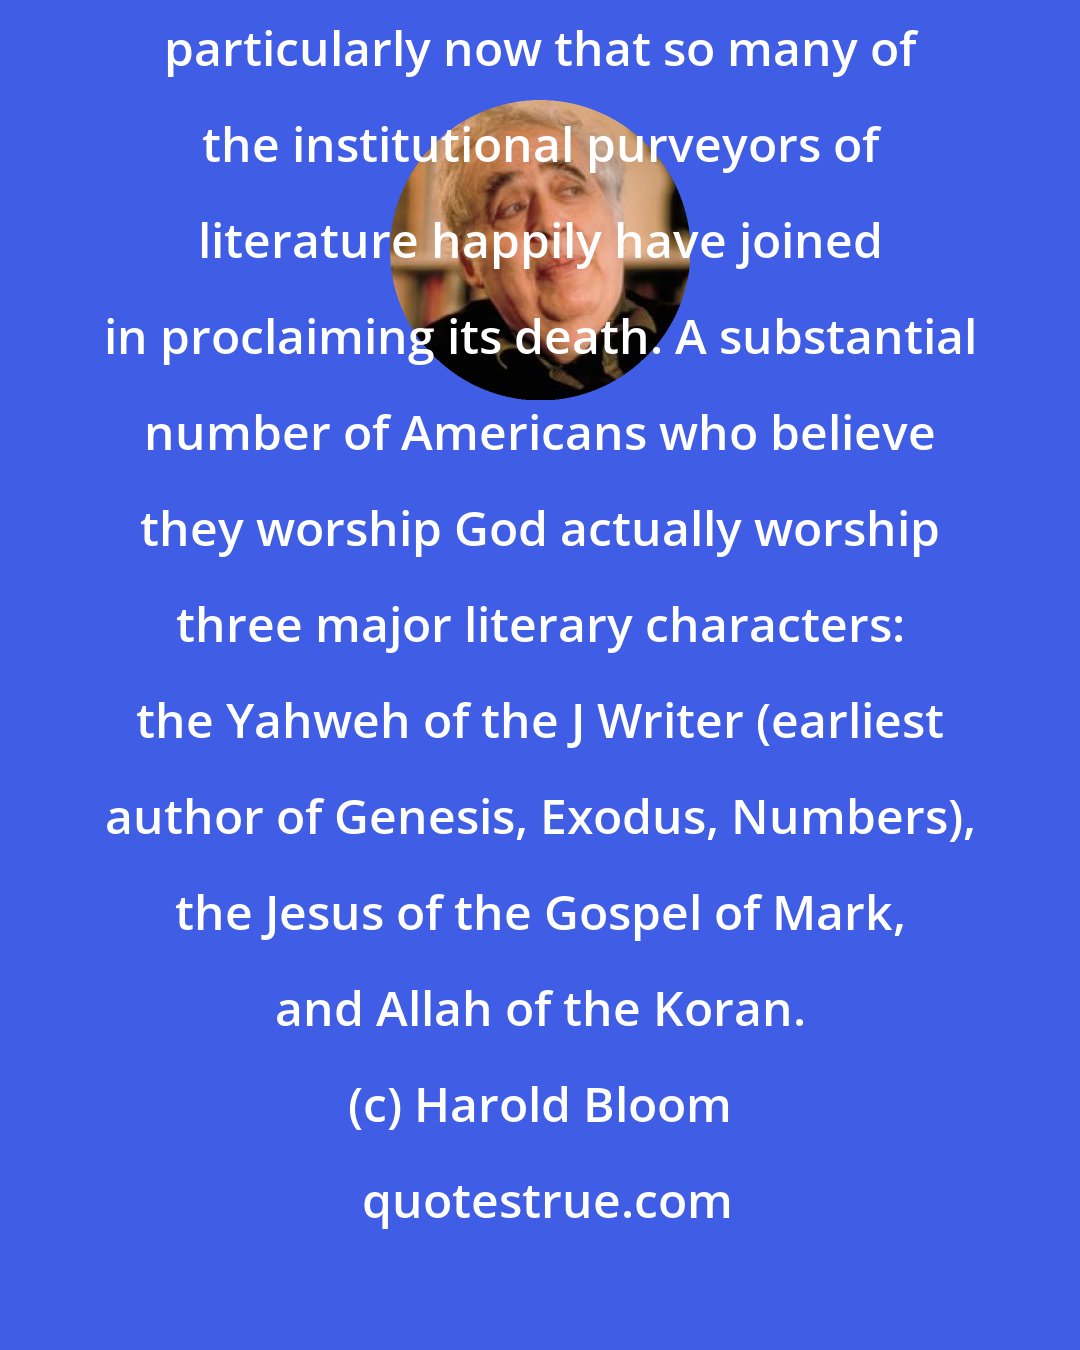 Harold Bloom: We can be reluctant to recognize how much of our culture was literary, particularly now that so many of the institutional purveyors of literature happily have joined in proclaiming its death. A substantial number of Americans who believe they worship God actually worship three major literary characters: the Yahweh of the J Writer (earliest author of Genesis, Exodus, Numbers), the Jesus of the Gospel of Mark, and Allah of the Koran.